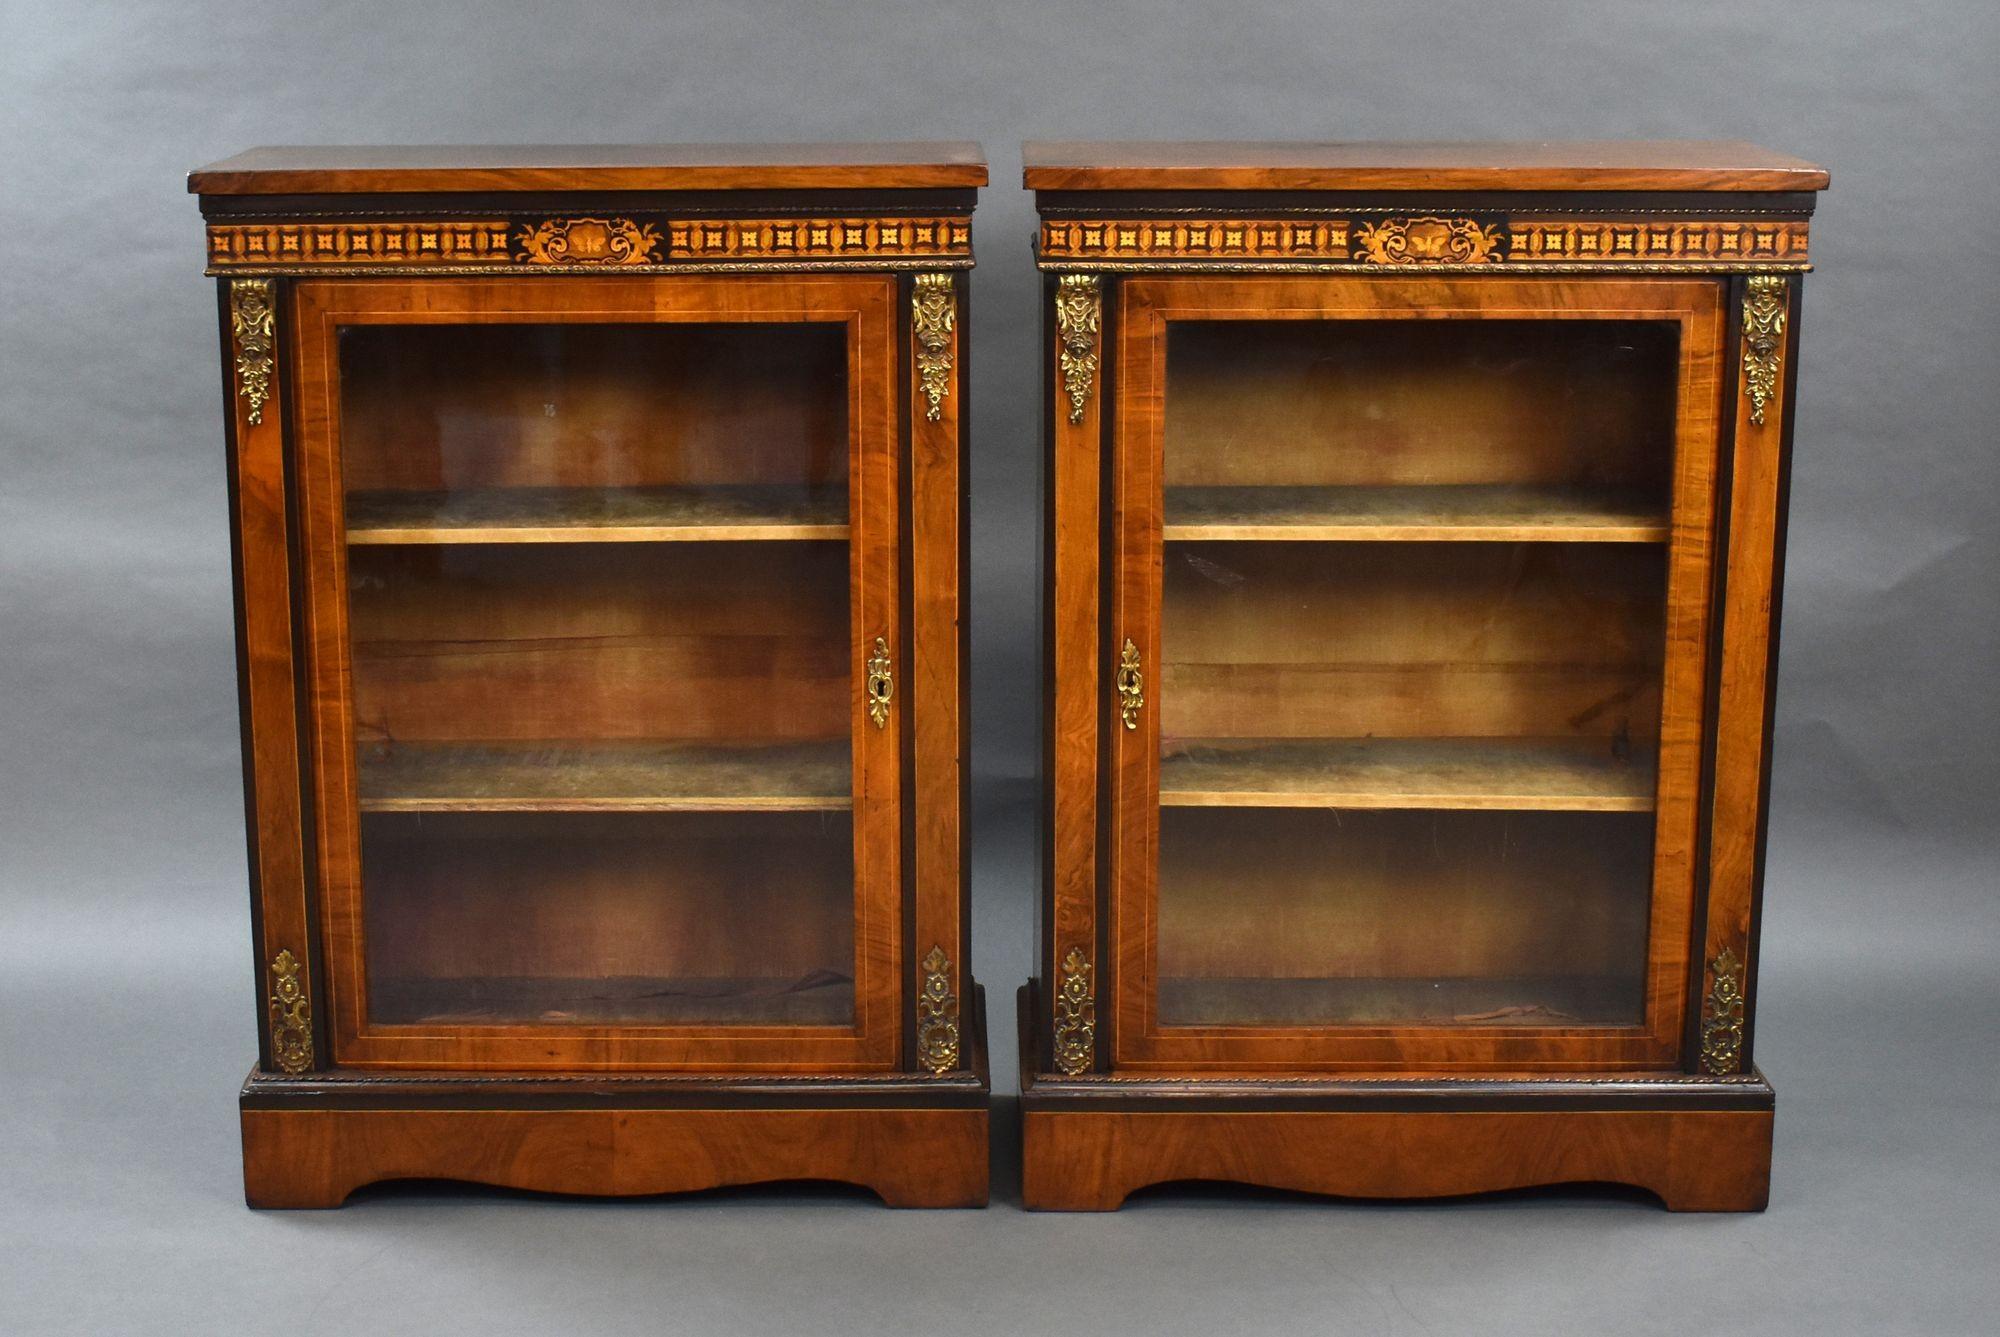 For sale is a pair of good quality Victorian walnut inlaid pier cabinets, each having a single glazed door, opening to two shelves. The cabinets are decorated with inlay and brass mounts throughout and both remain in very good condition.